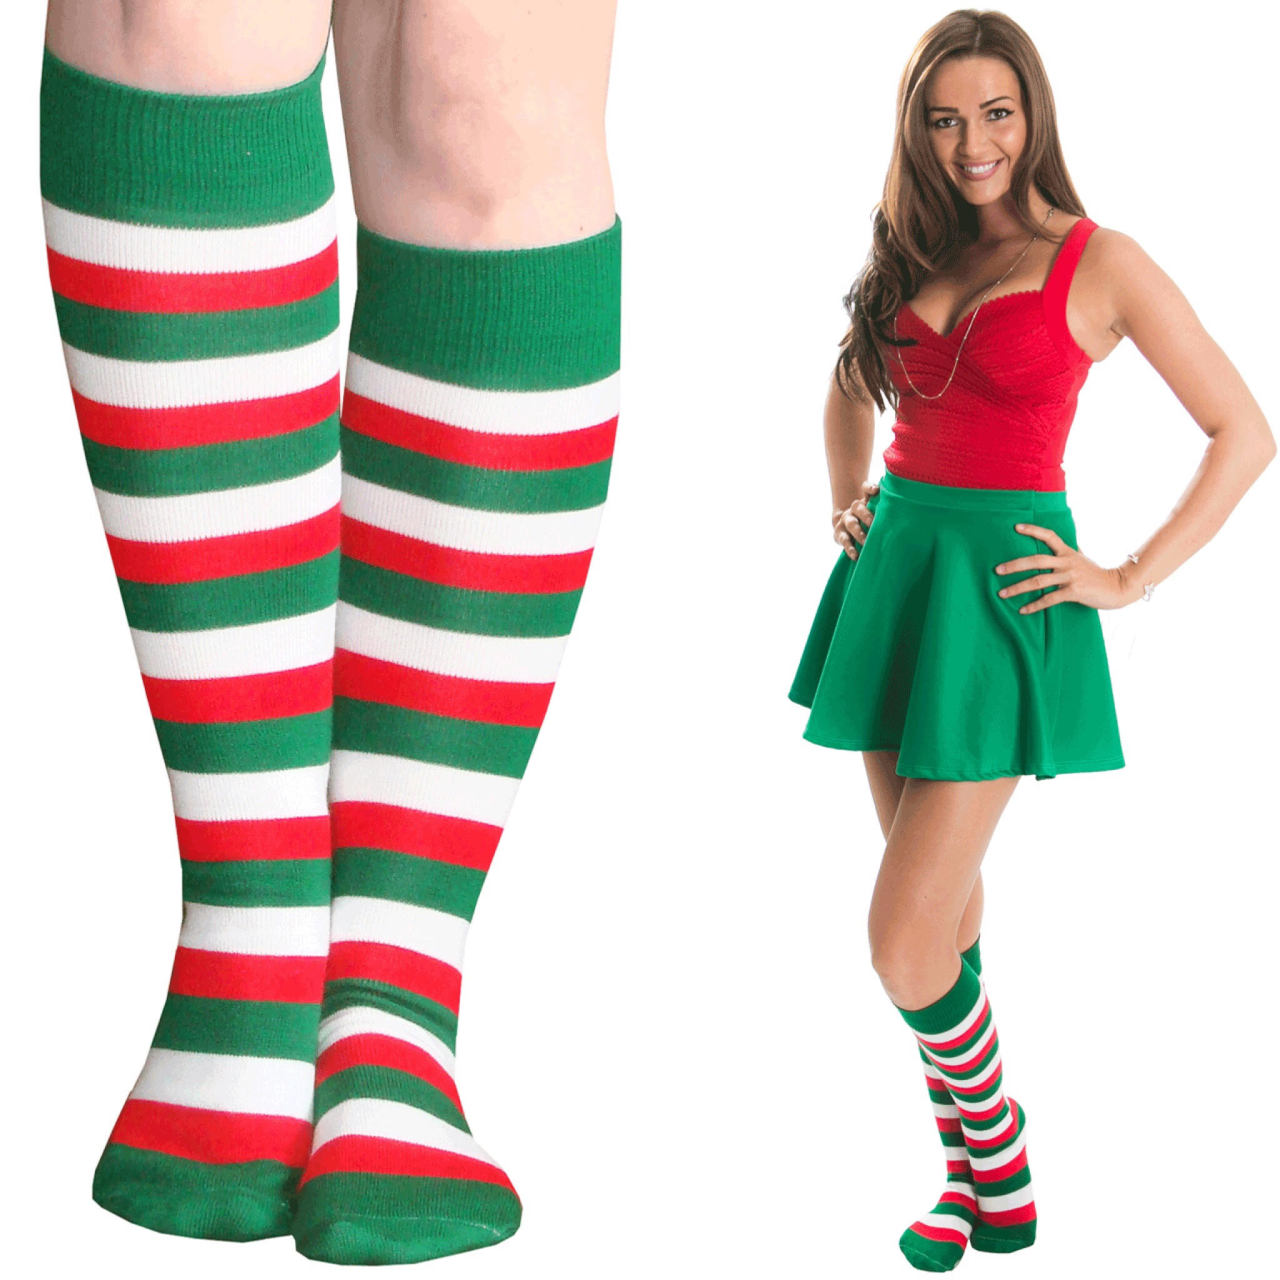 Chrissy's Knee Socks, These green, red and white striped socks are...